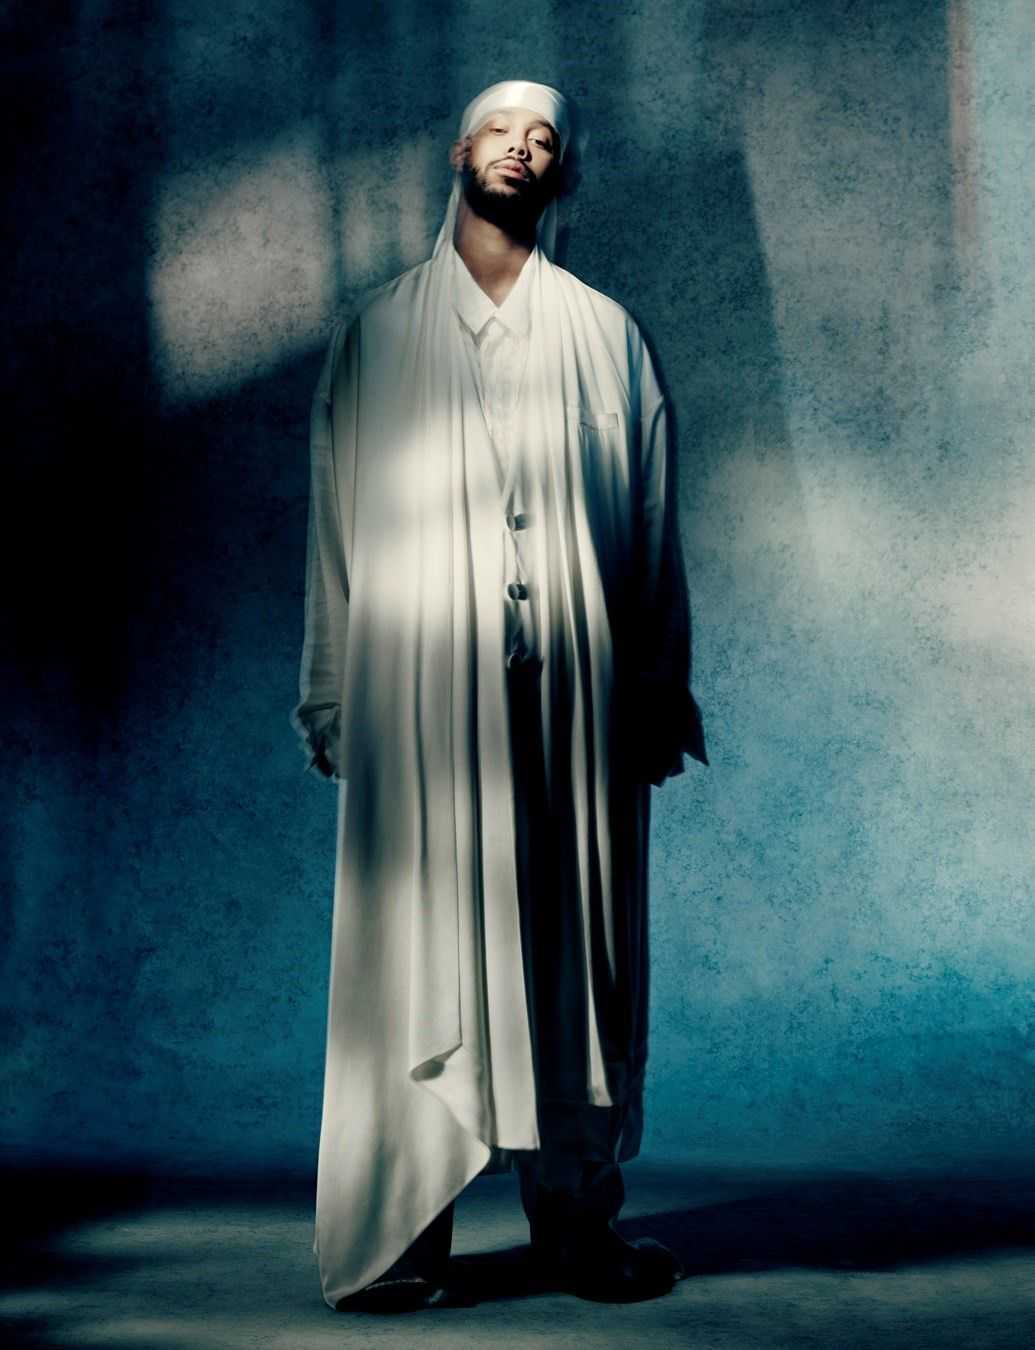 DAZED 'Old Soul, New Spirit' - Paolo Roversi - 2913